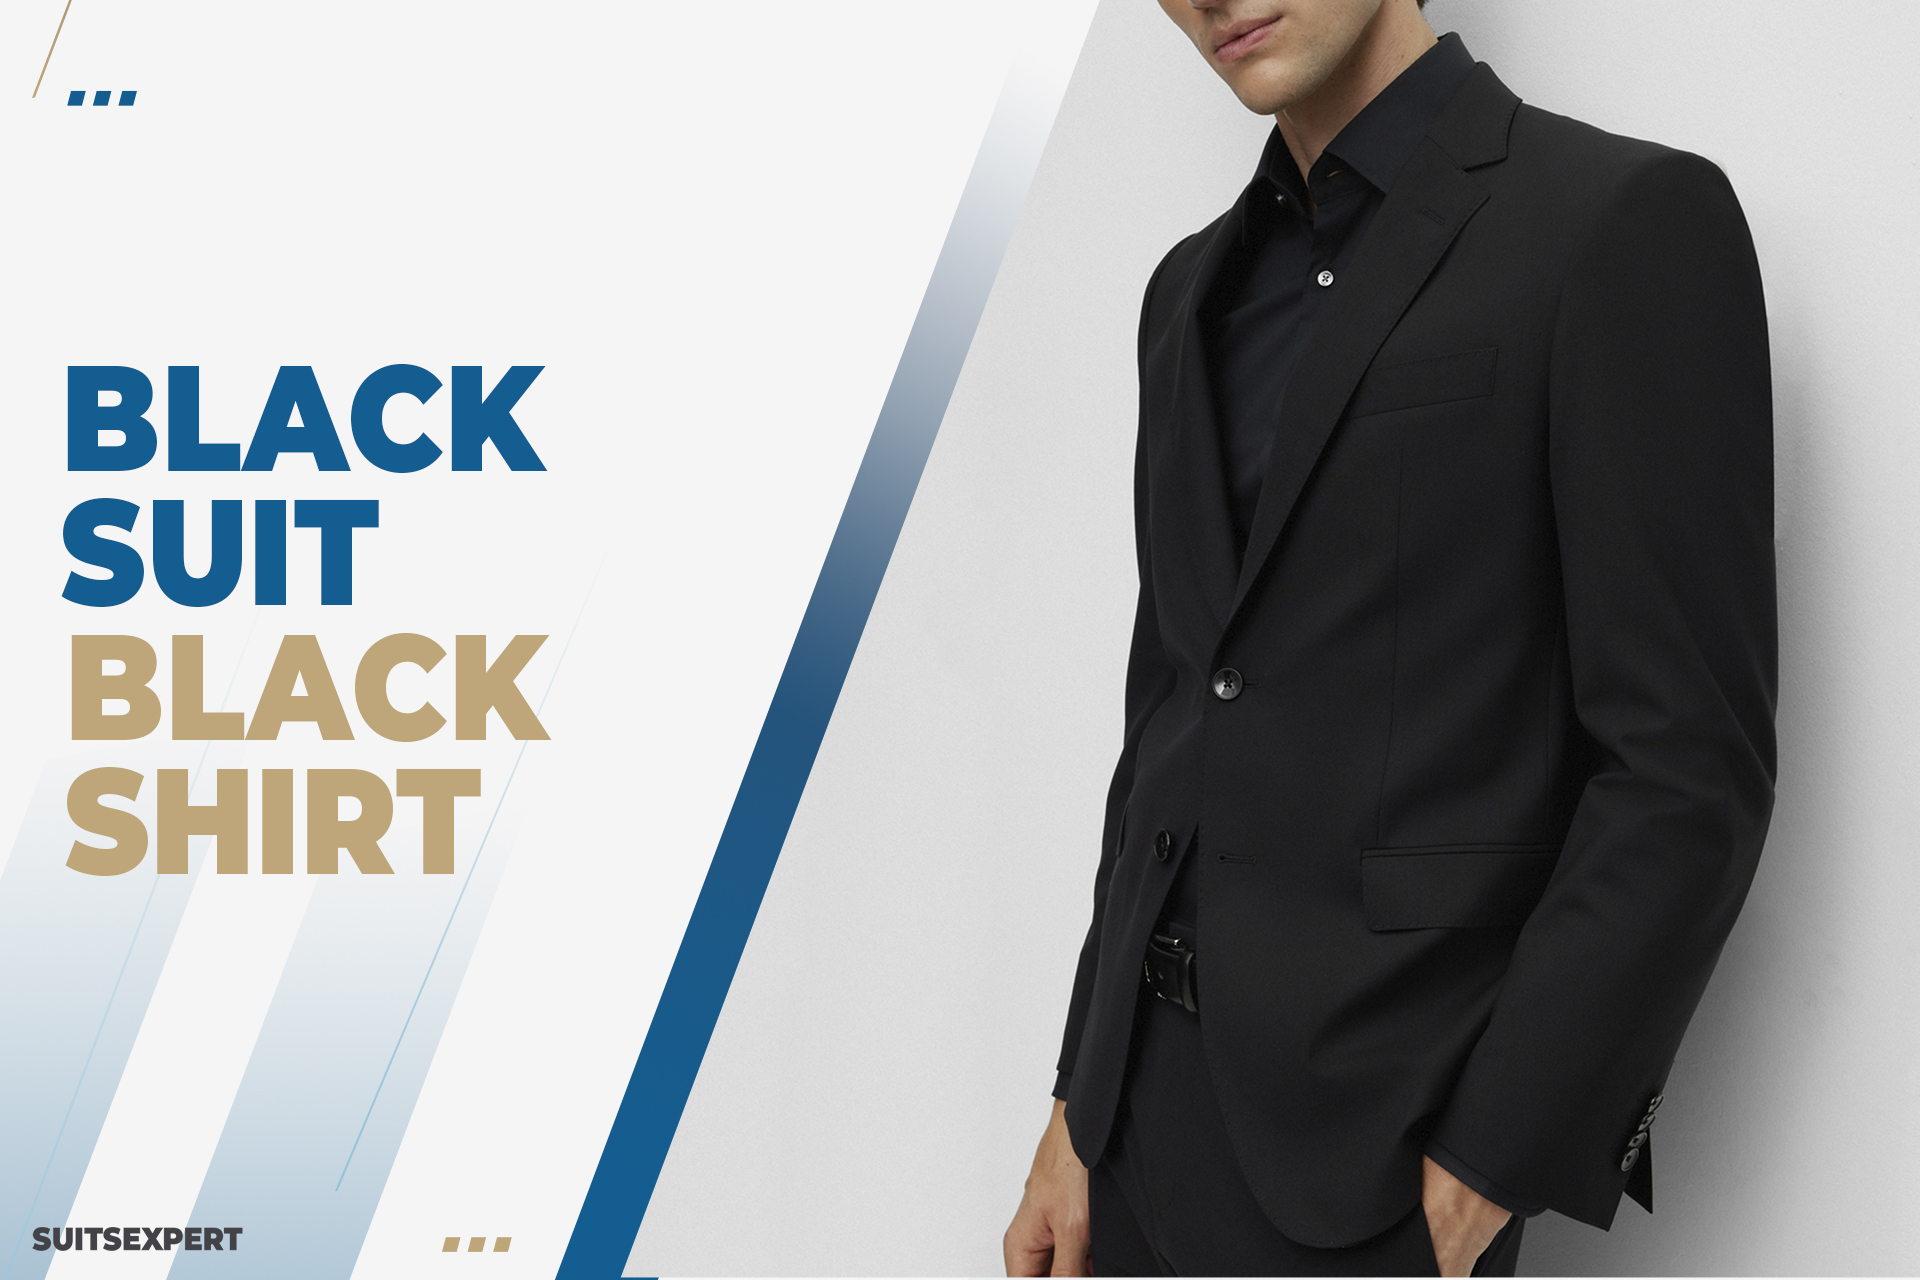 A Complete Guide to Black Suit & Shirt Combinations - The Trend